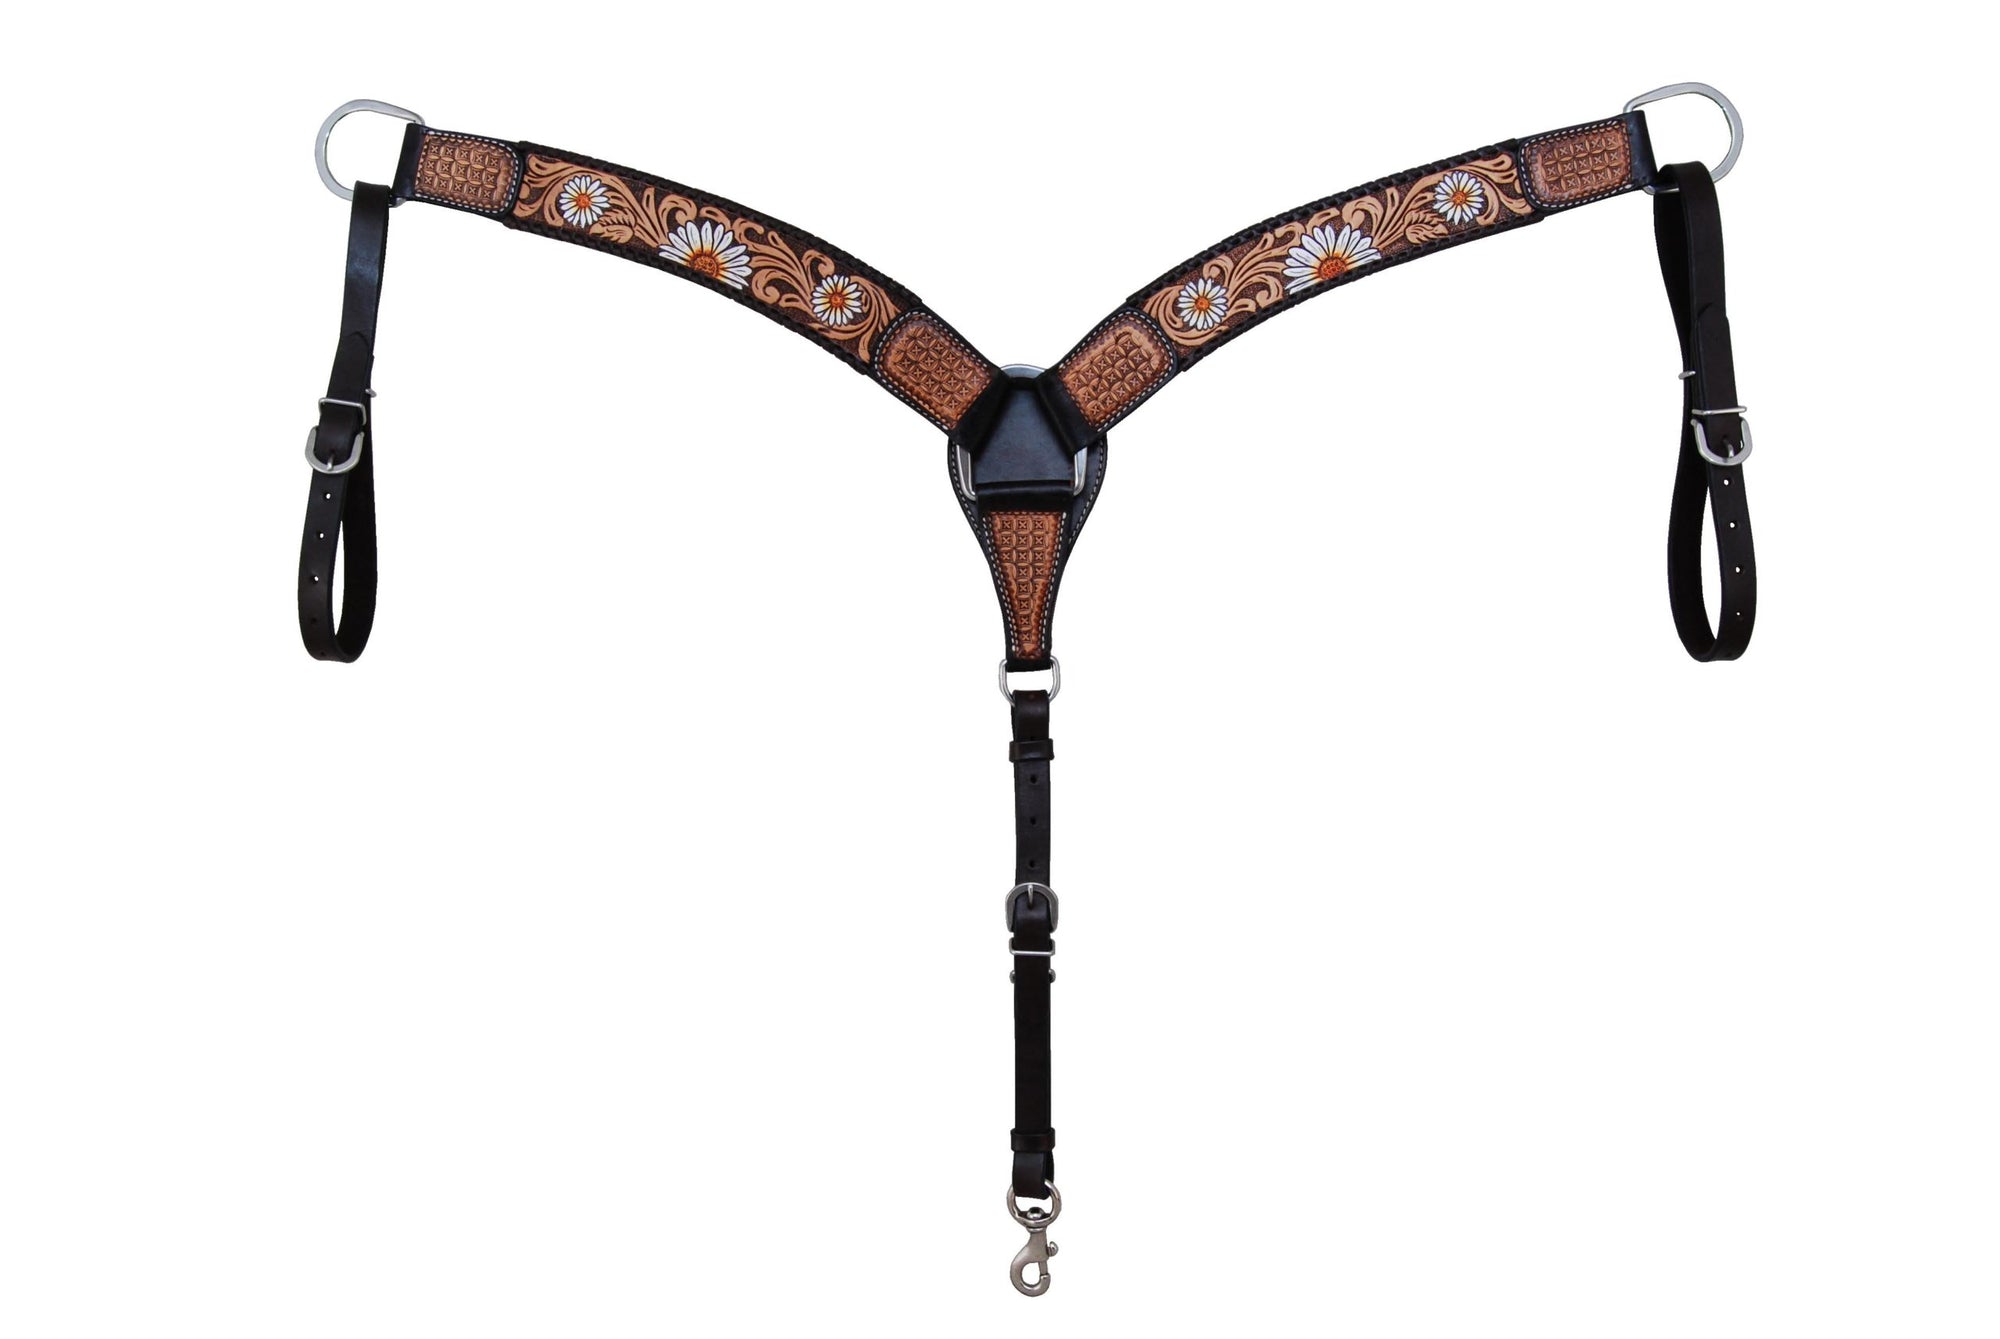 Rafter T Ranch Breastplate with Daisy Tooling